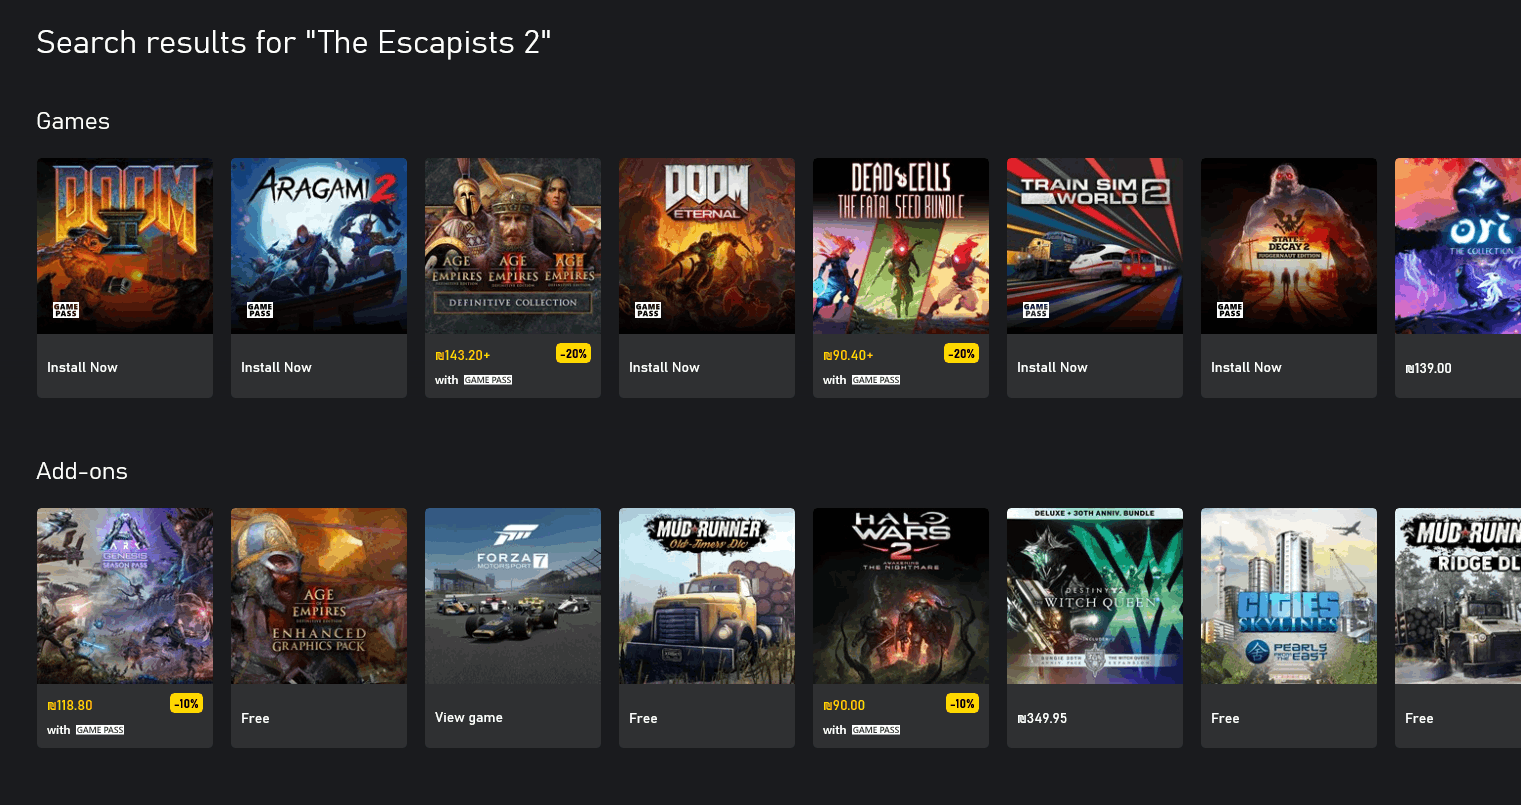 Xbox Studios games now appearing on GeForce Now